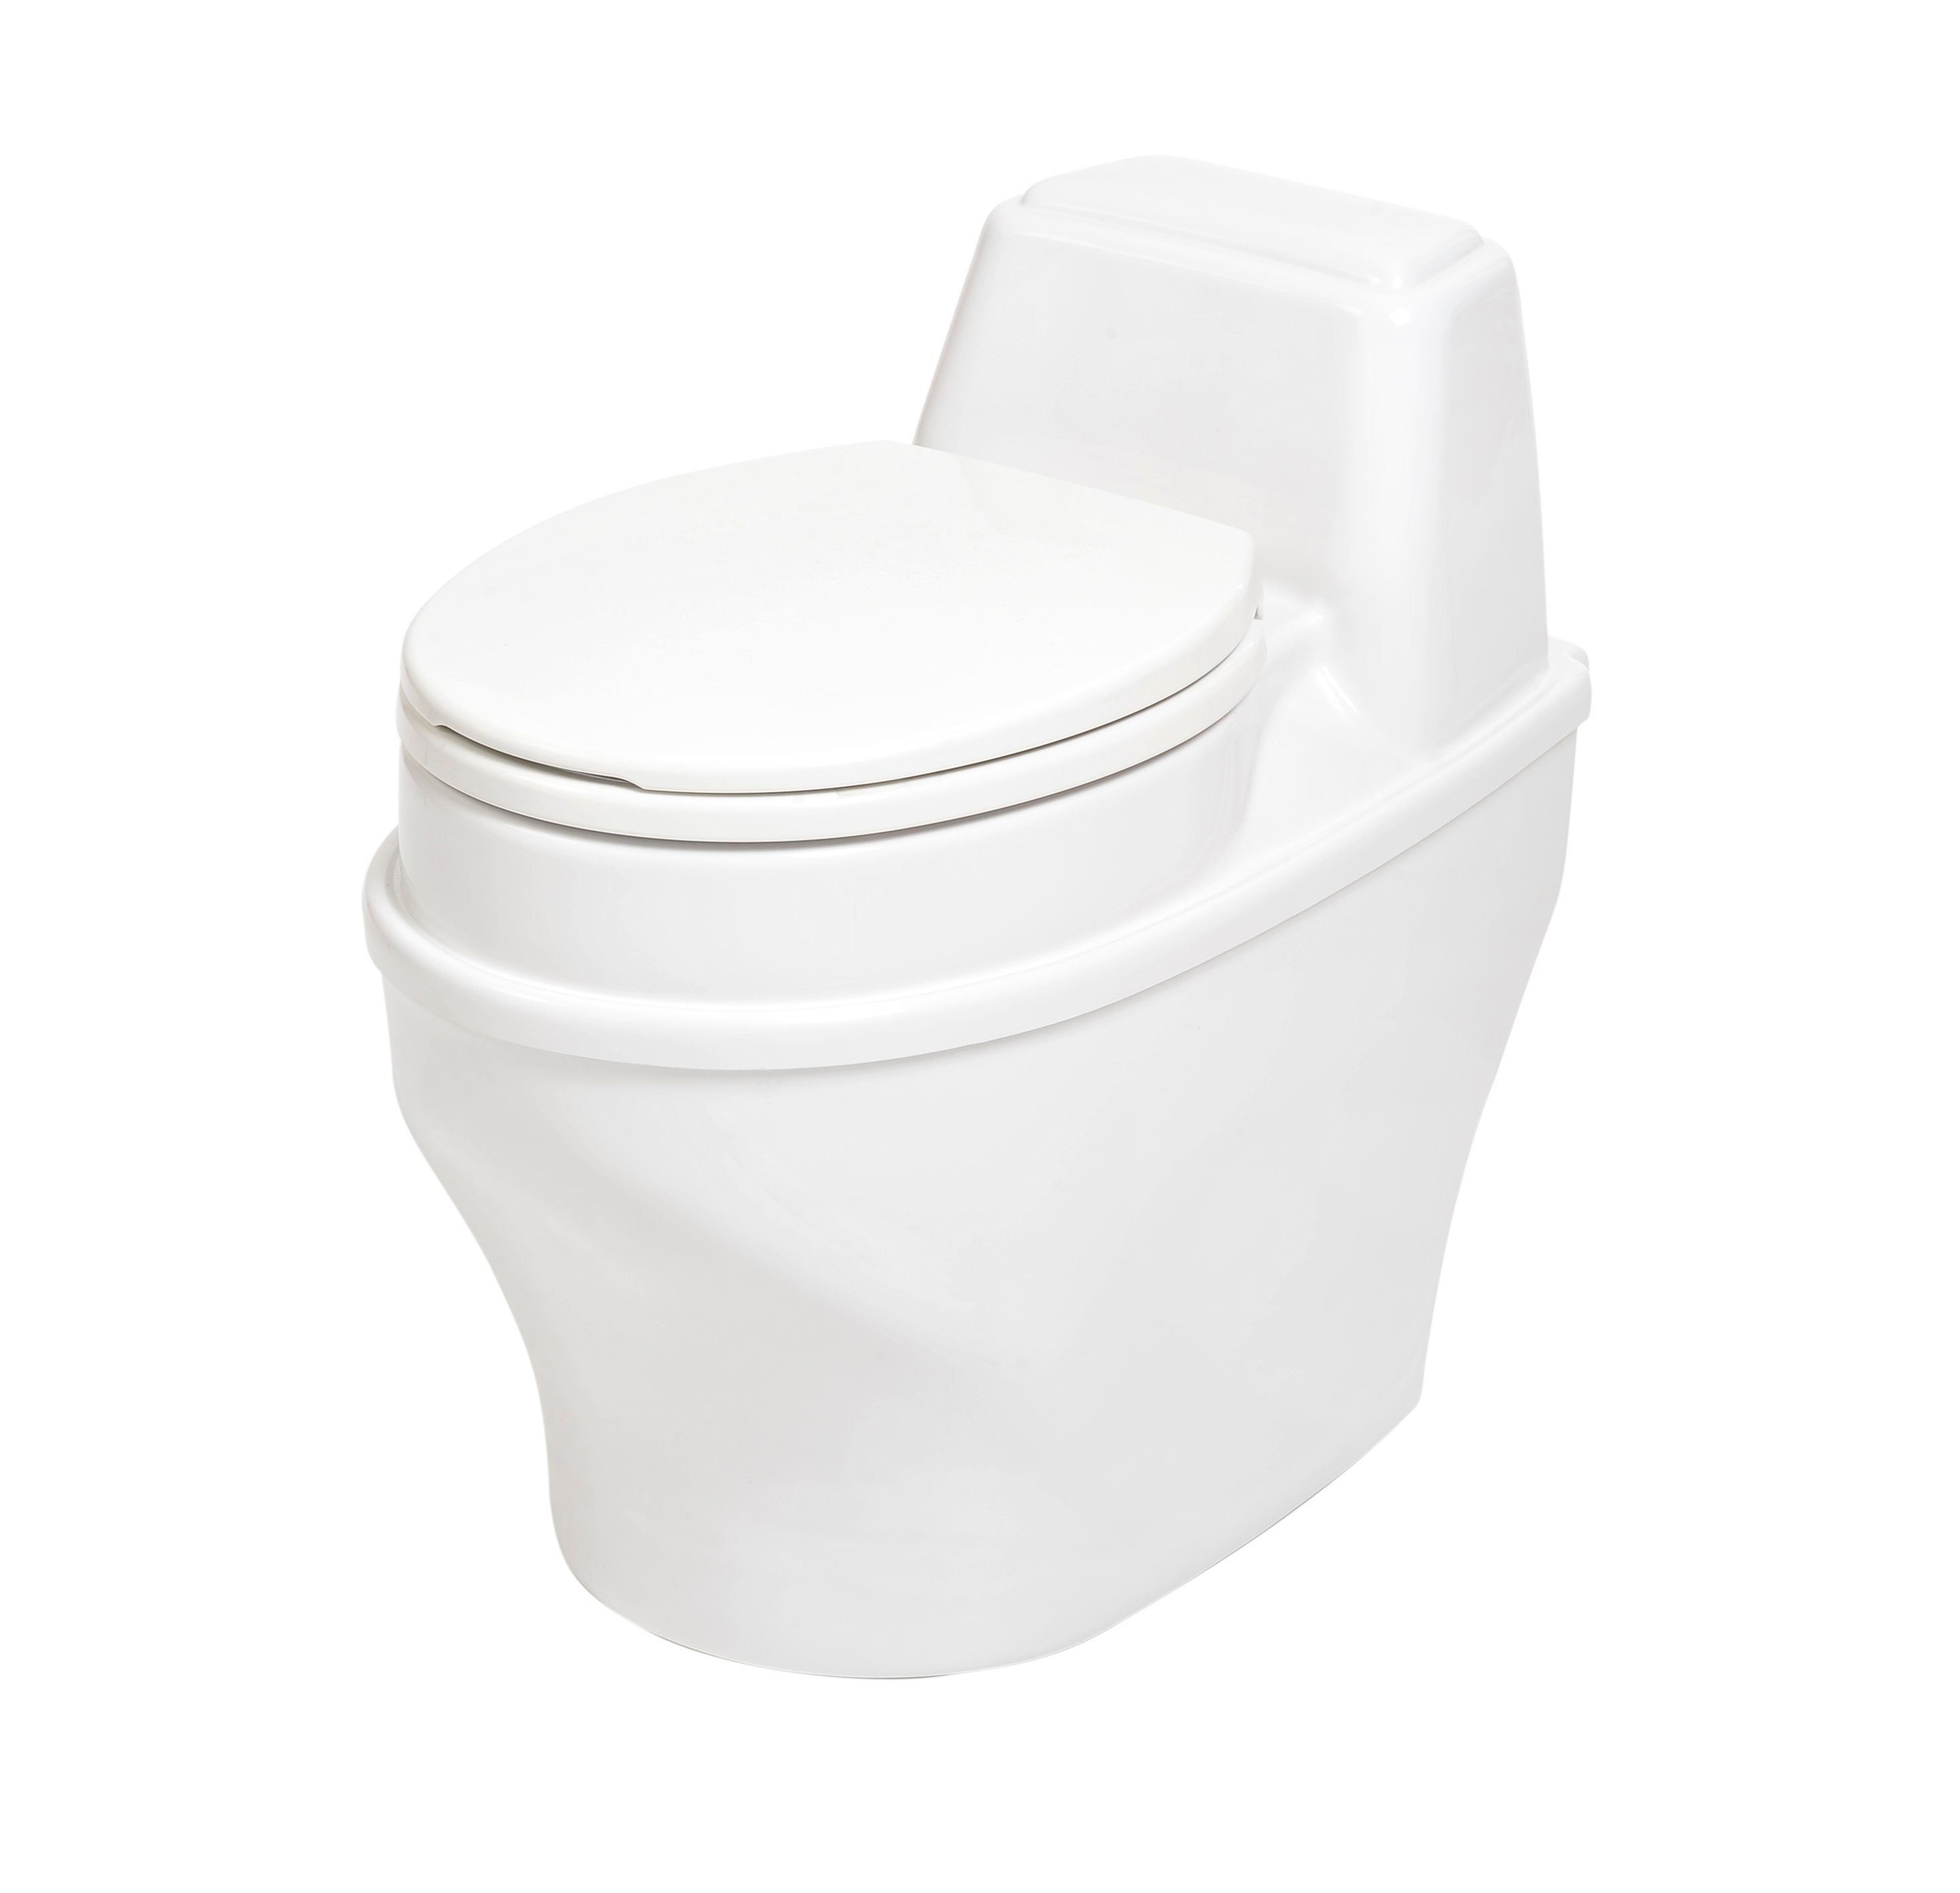 BioLet Toilet Systems